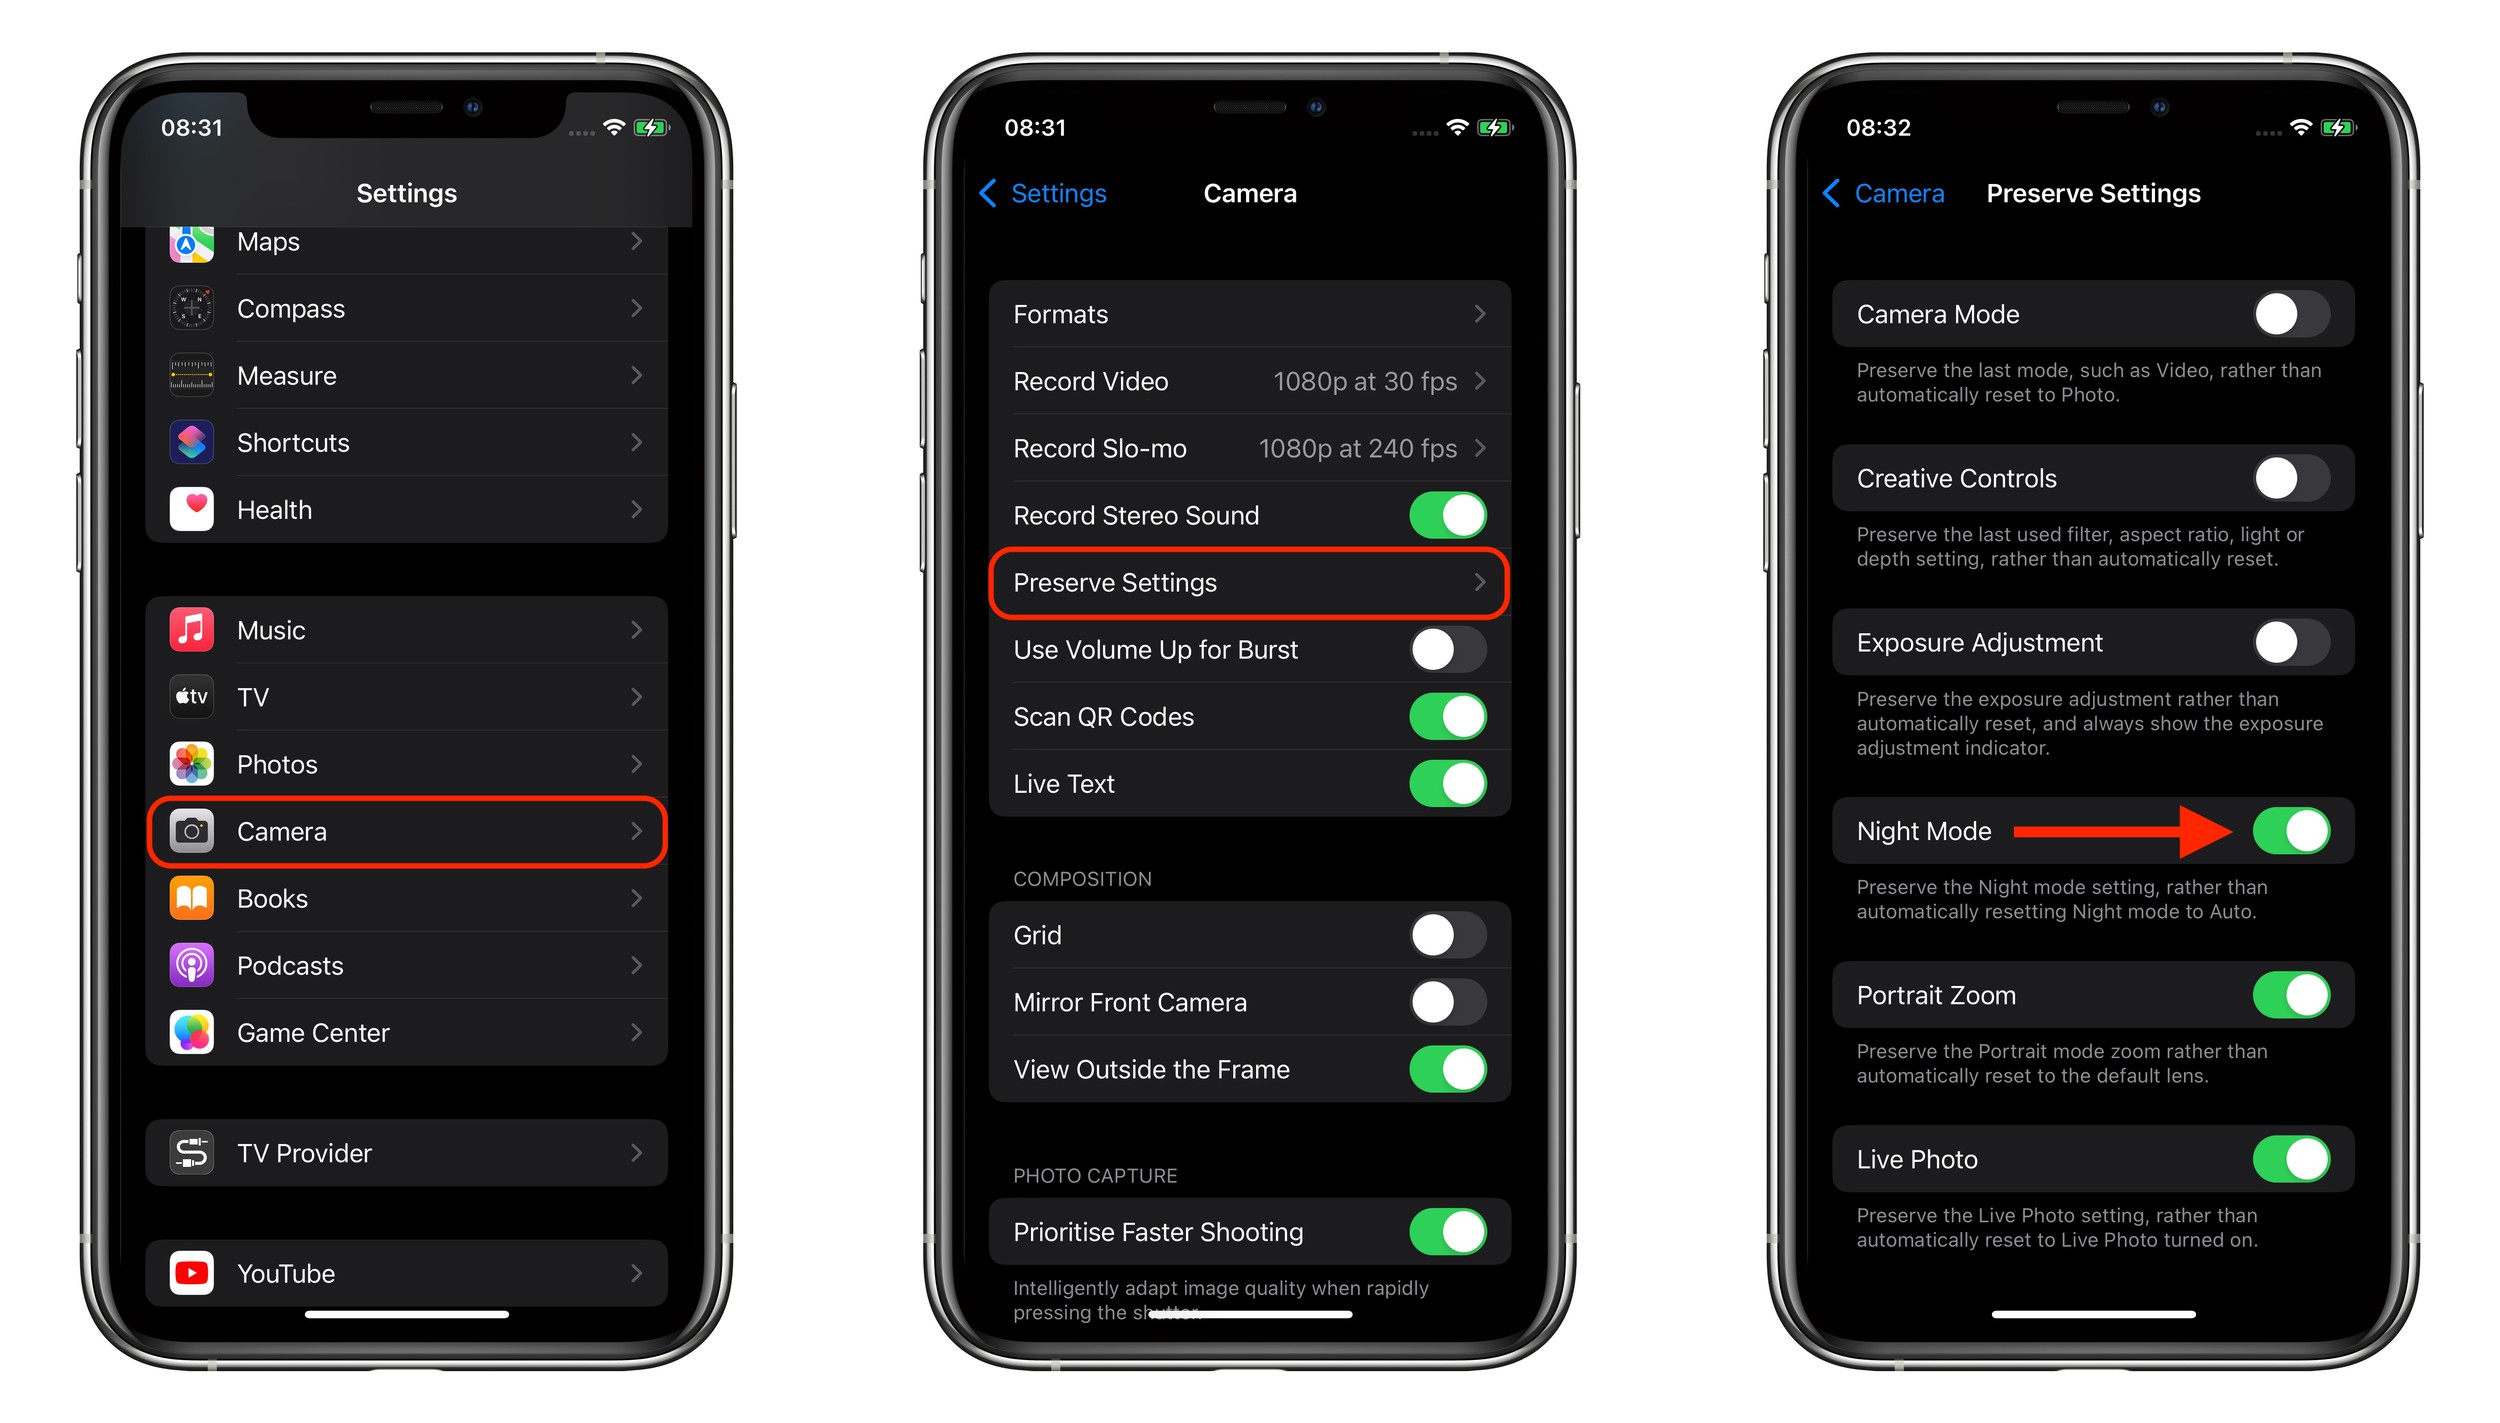 How To Turn Off Night Mode On IPhone